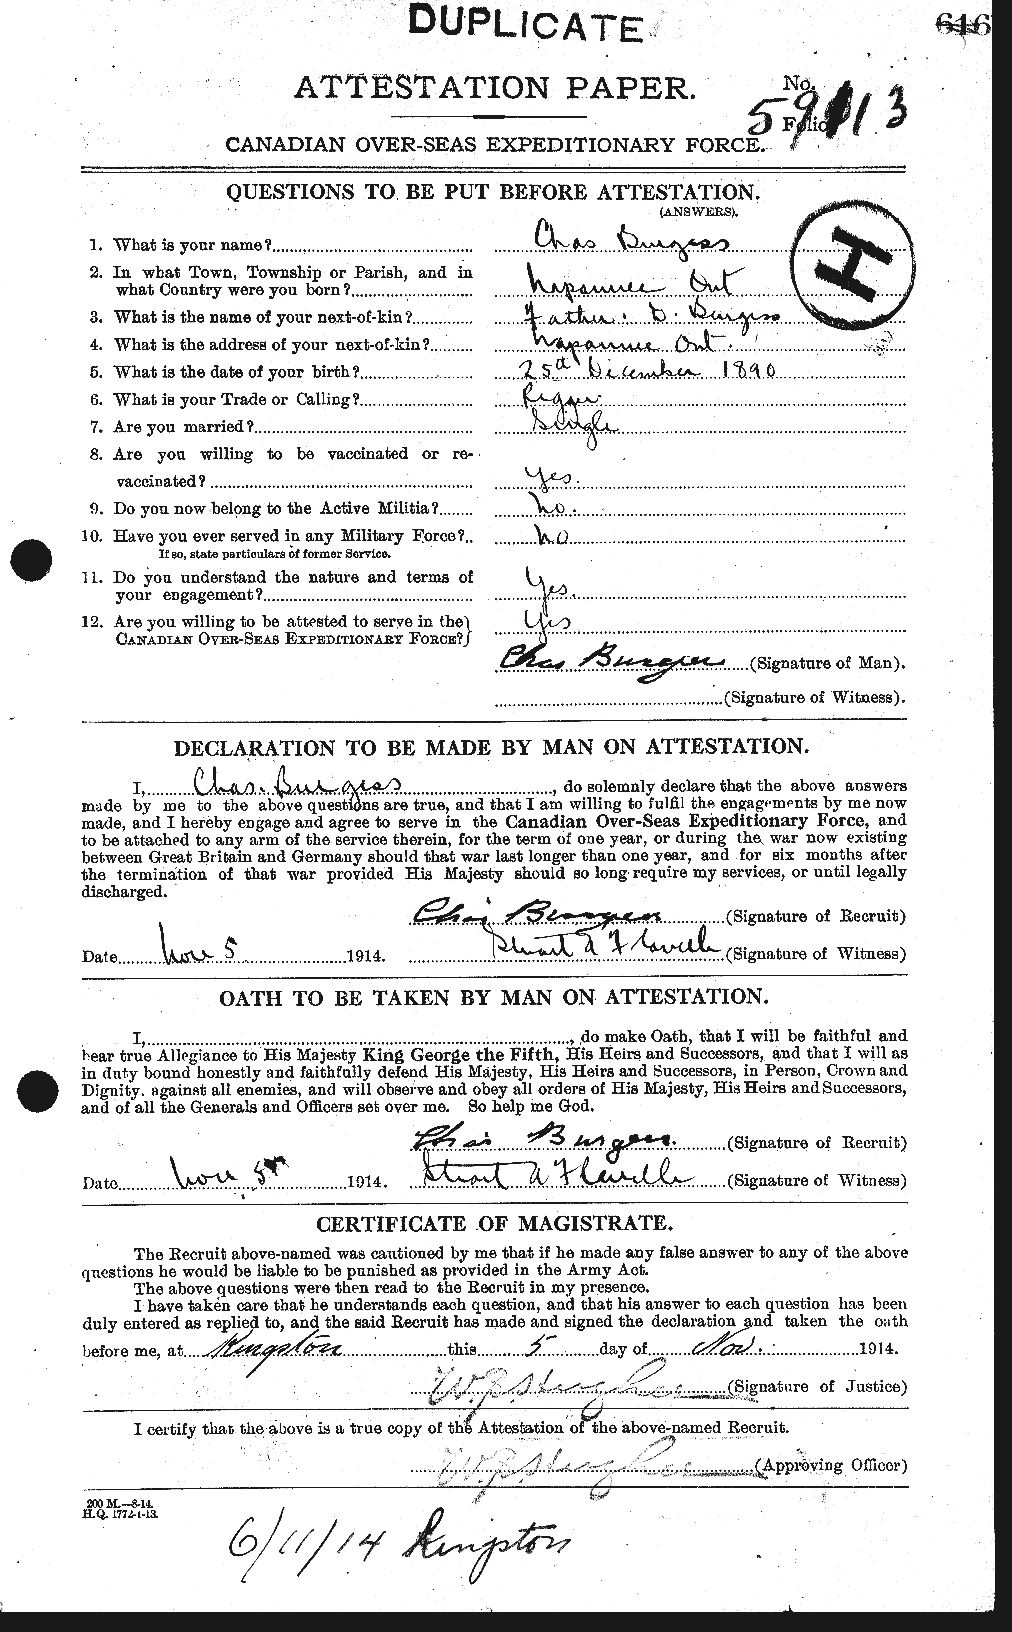 Personnel Records of the First World War - CEF 275336a